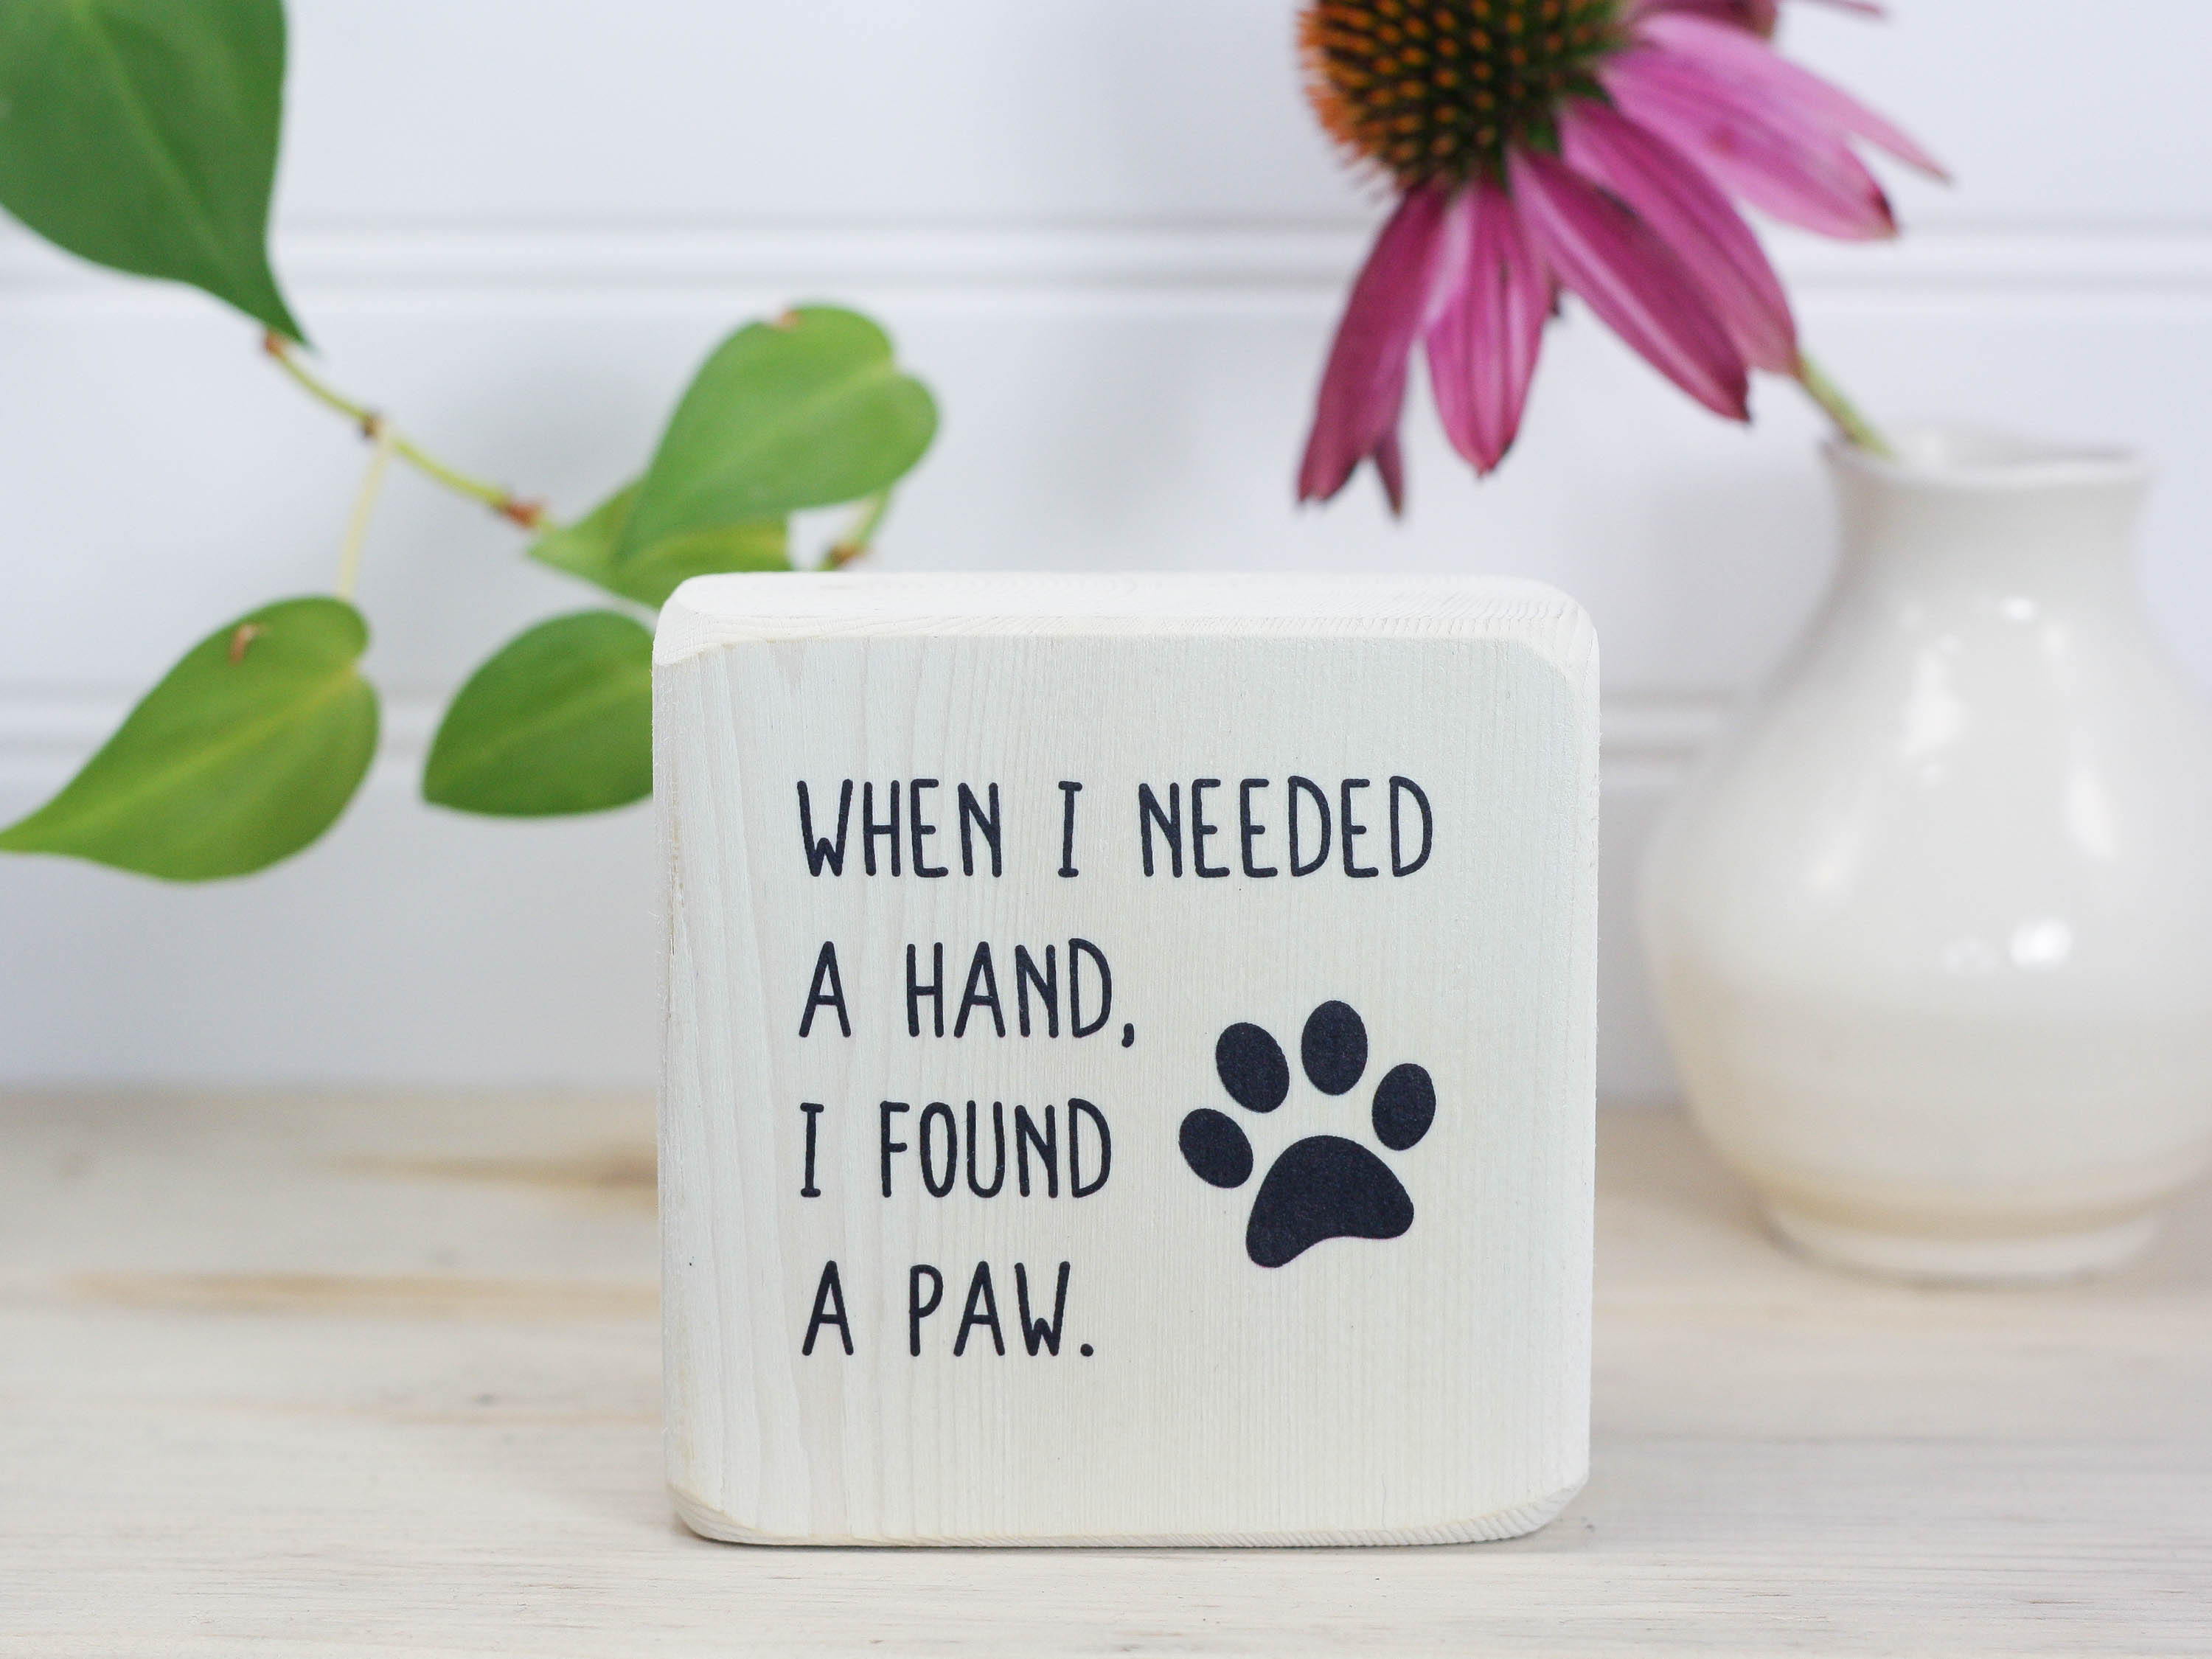 Small wood sign in whitewash with the saying "When I needed a hand, I found a paw".